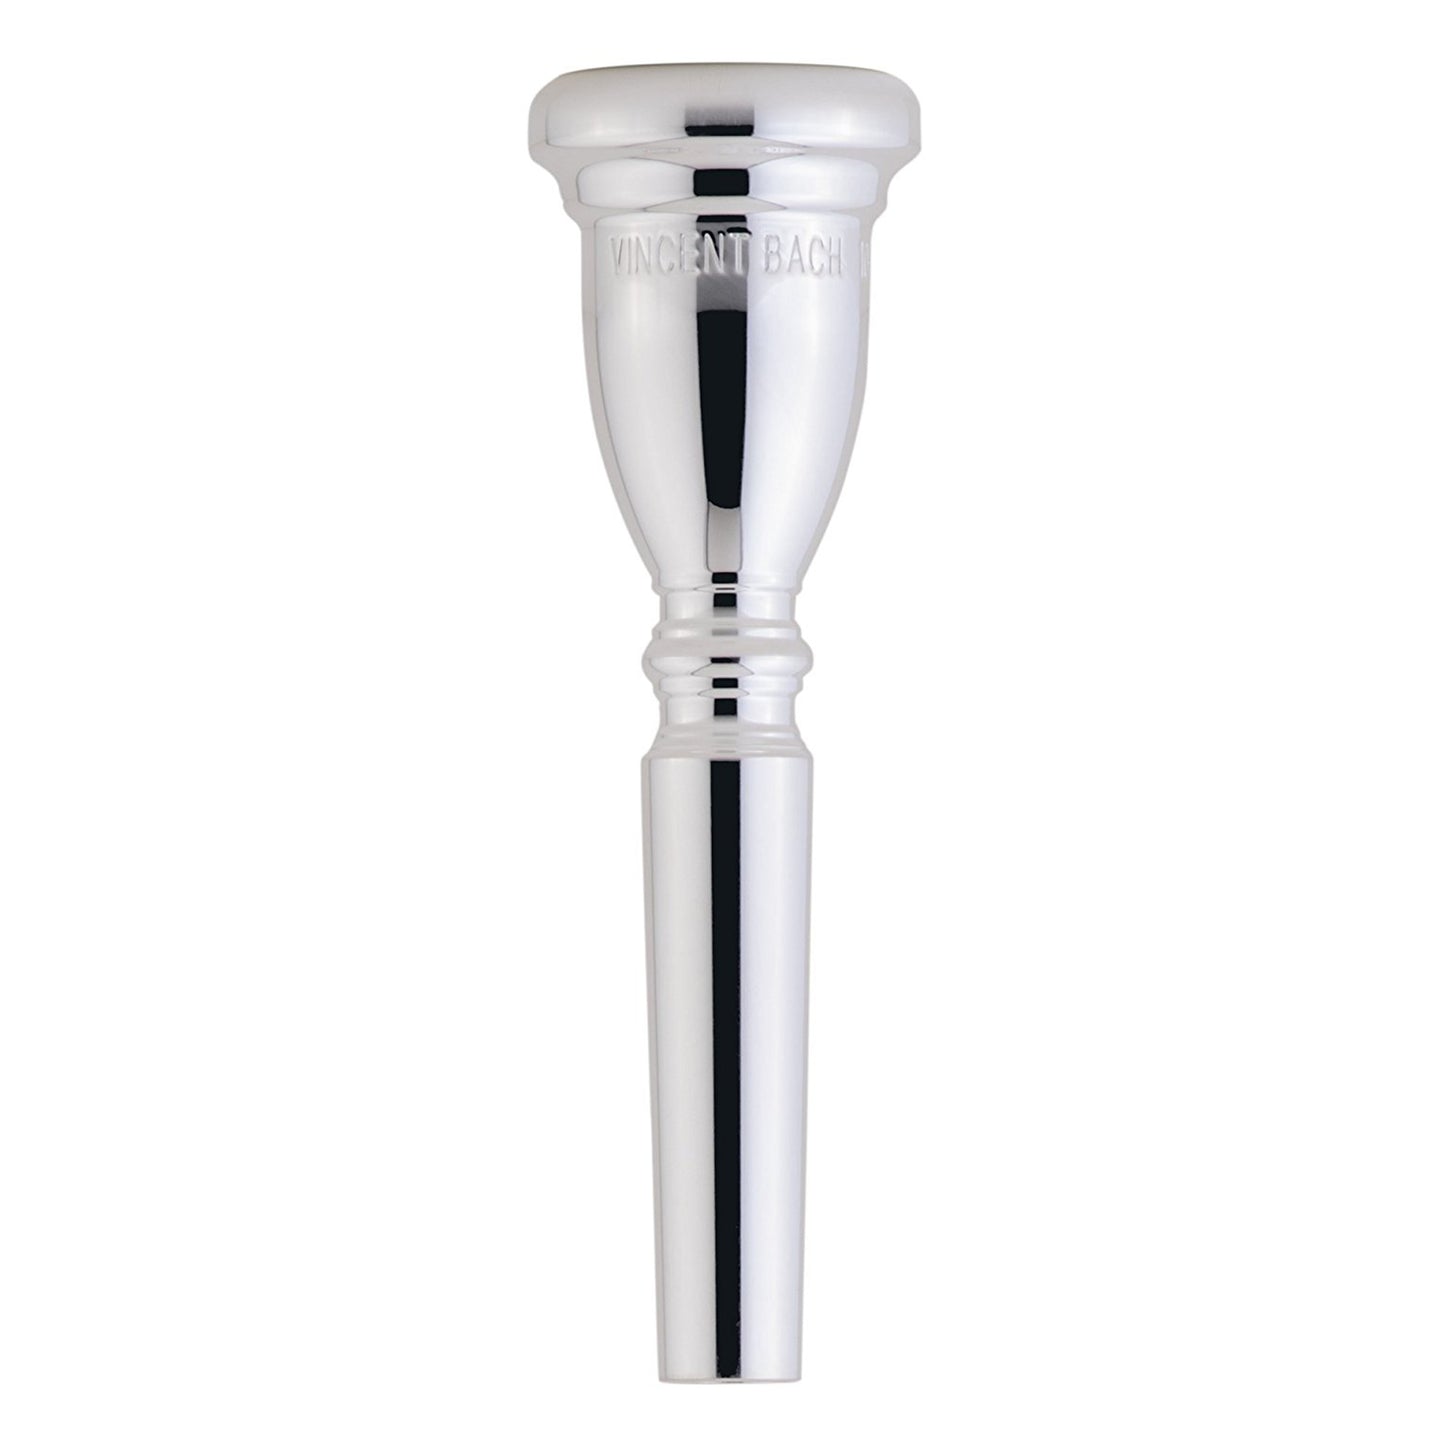 Genuine Bach Commercial Trumpet Mouthpiece 5S